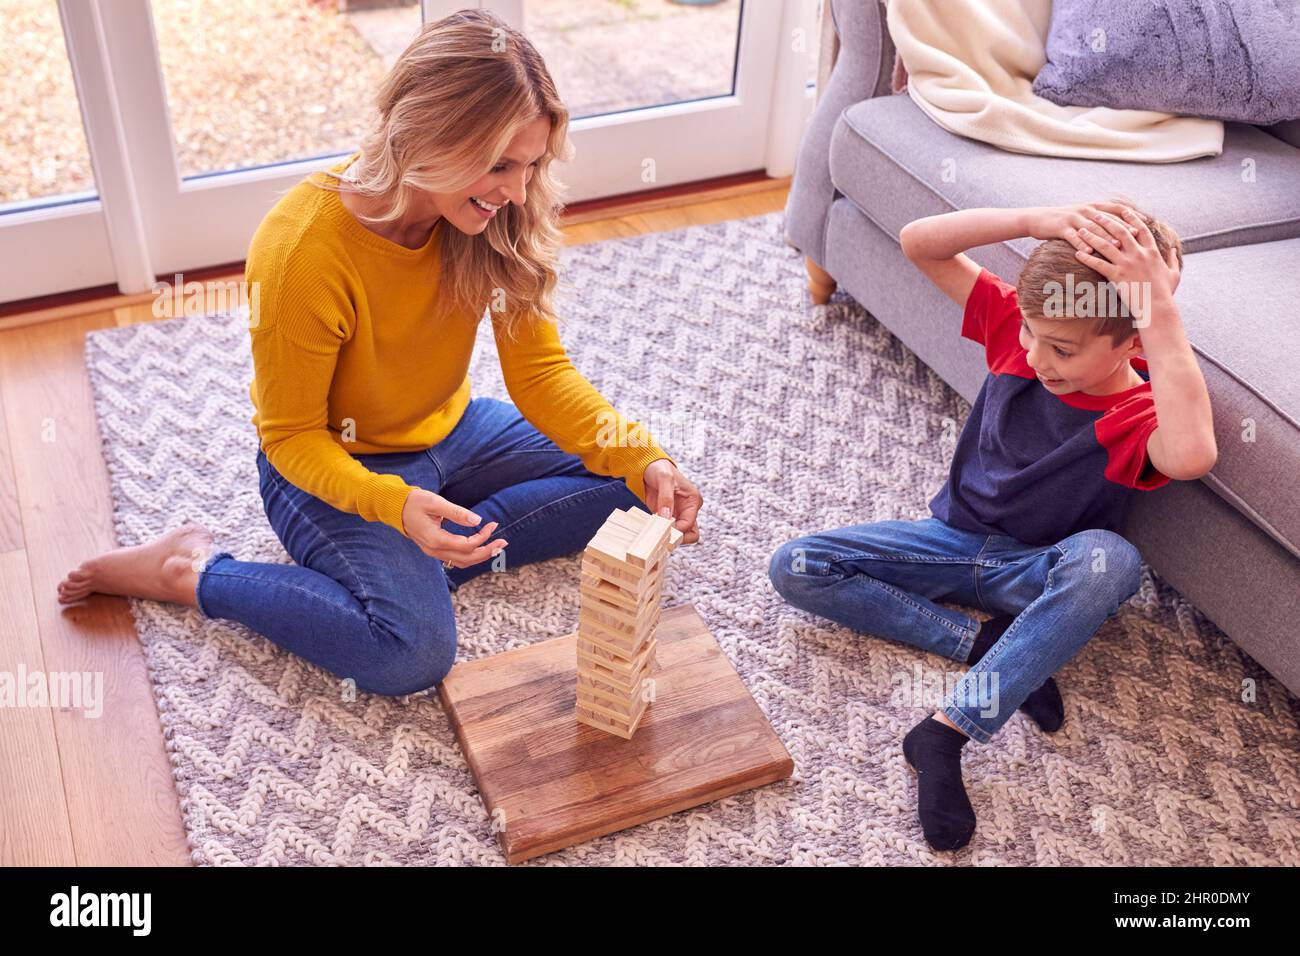 Mother And Son At Home Playing Game Stacking And Balancing Wooden Blocks Together Stock Photo